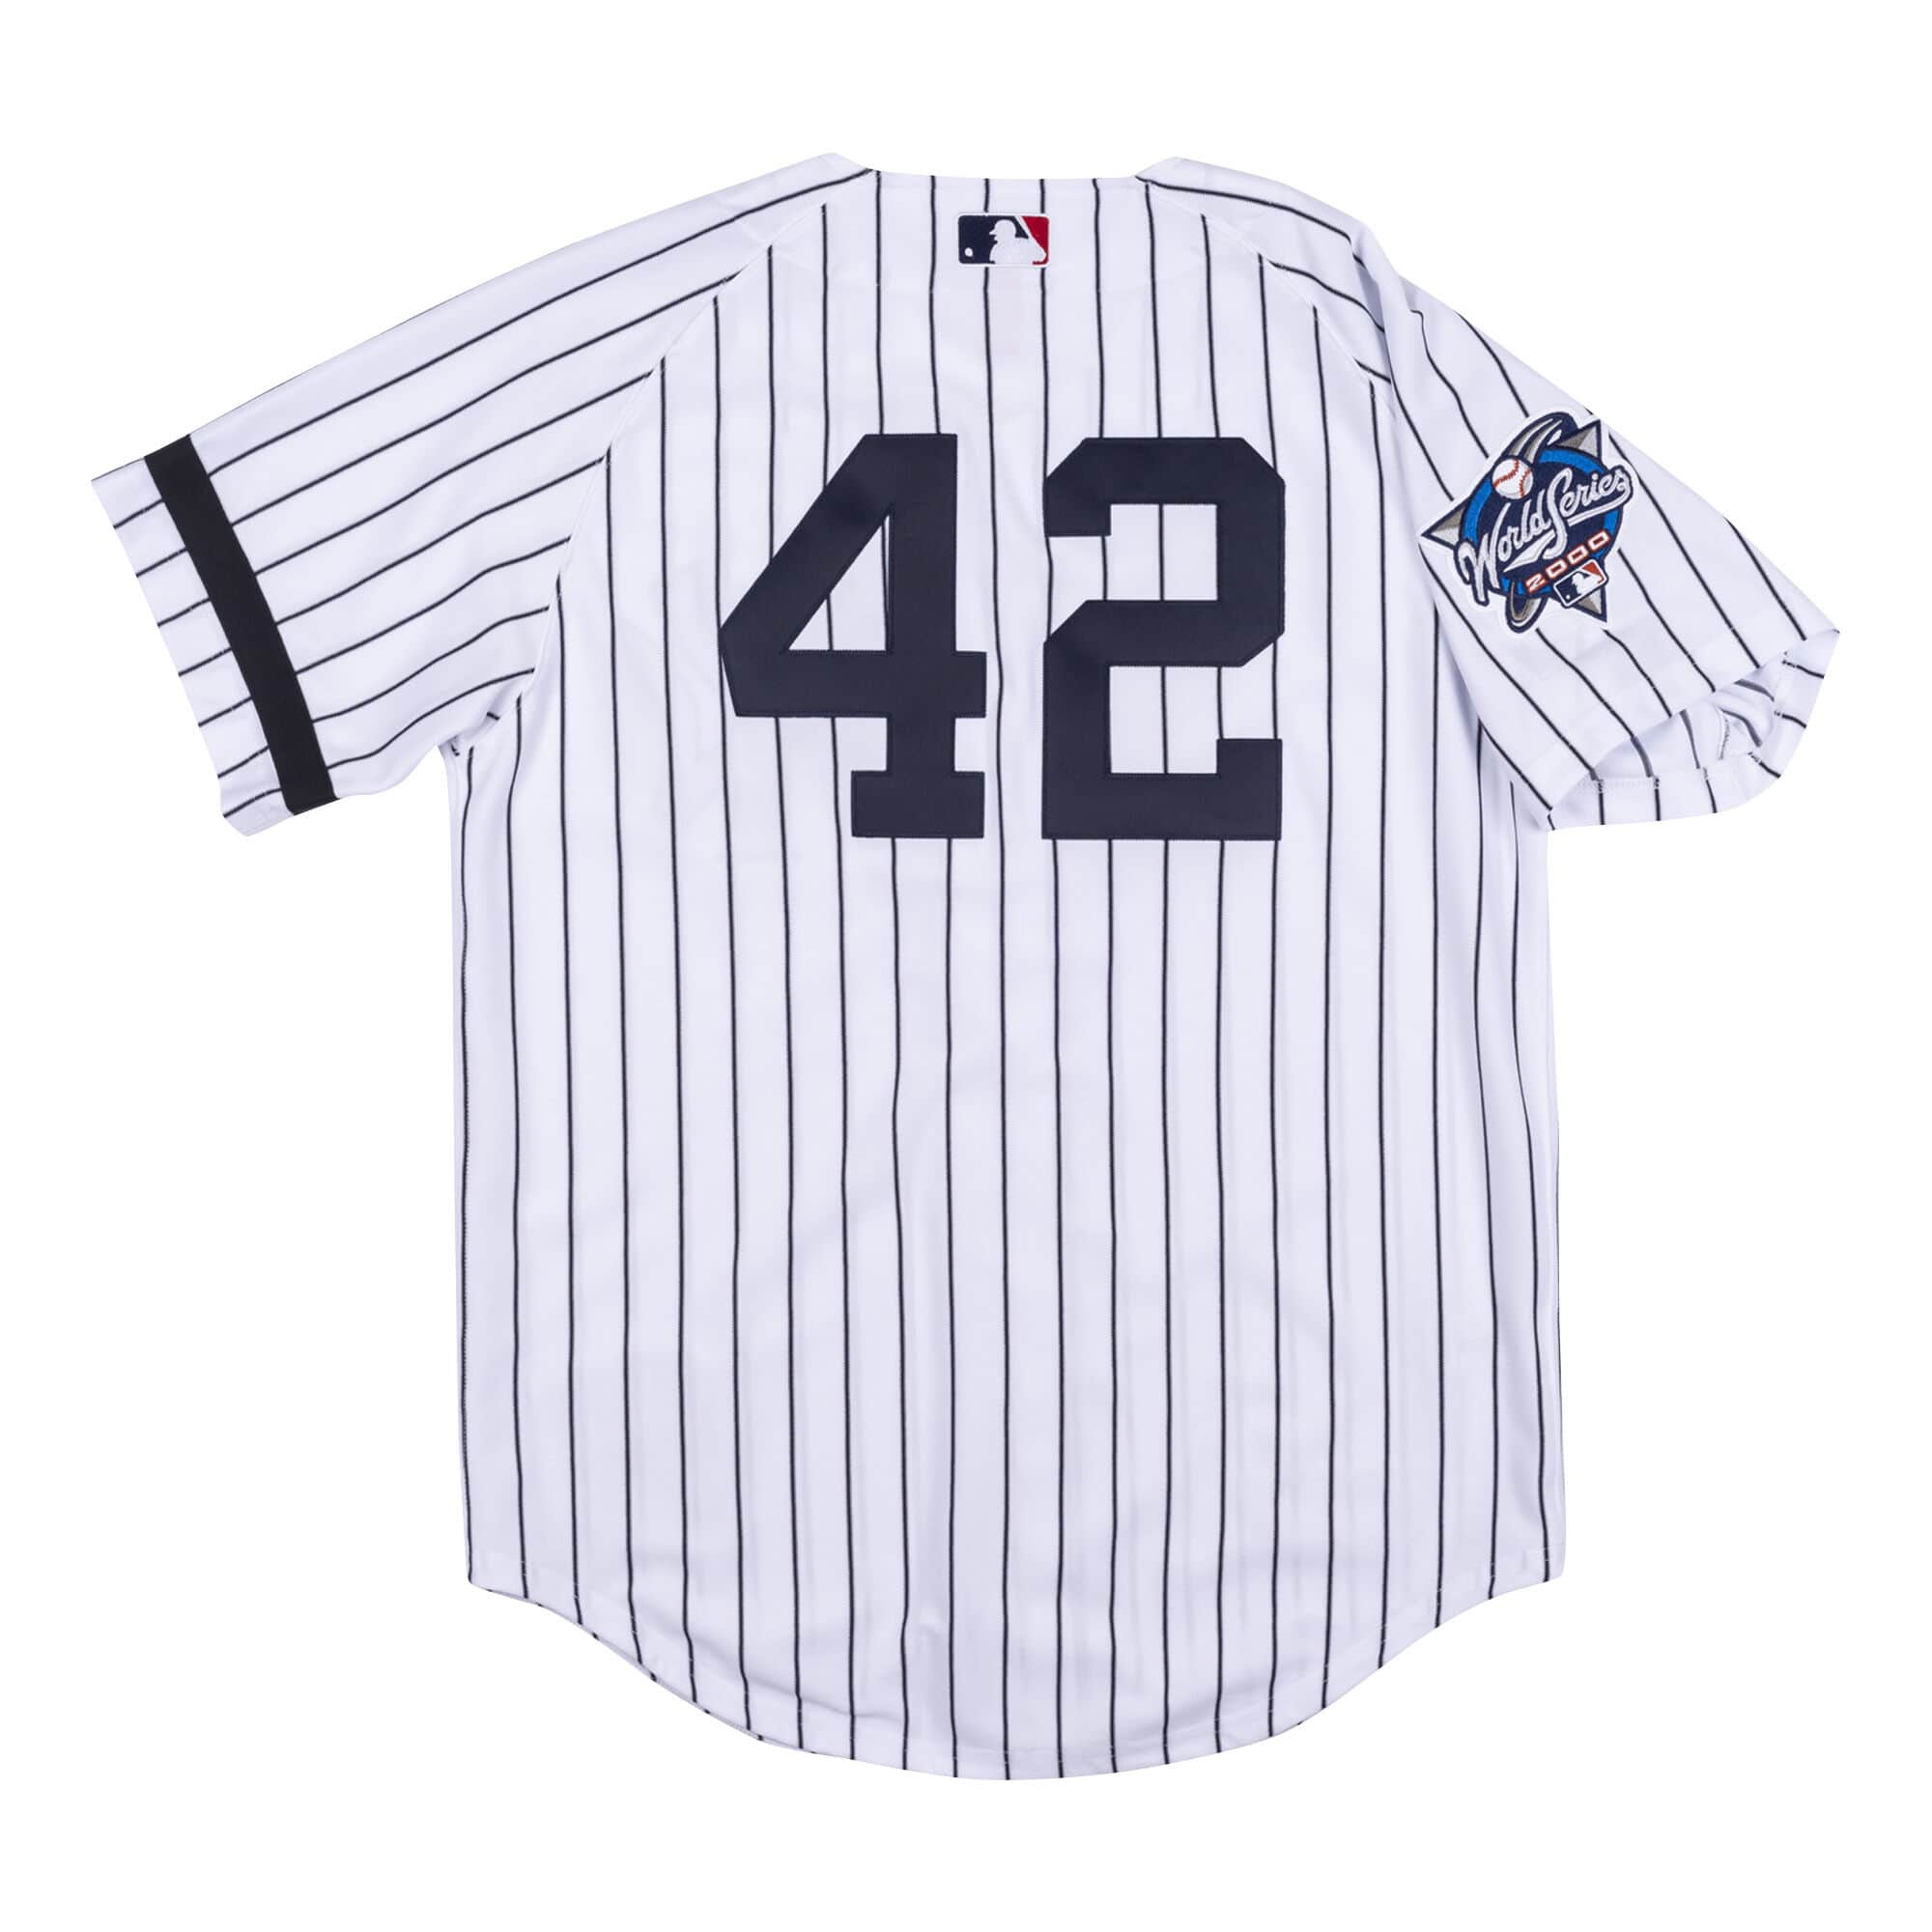 Buy New York Yankees BP Jersey 1998 - Mariano Rivera Men's Shirts from  Mitchell & Ness. Find Mitchell & Ness fashion & more at